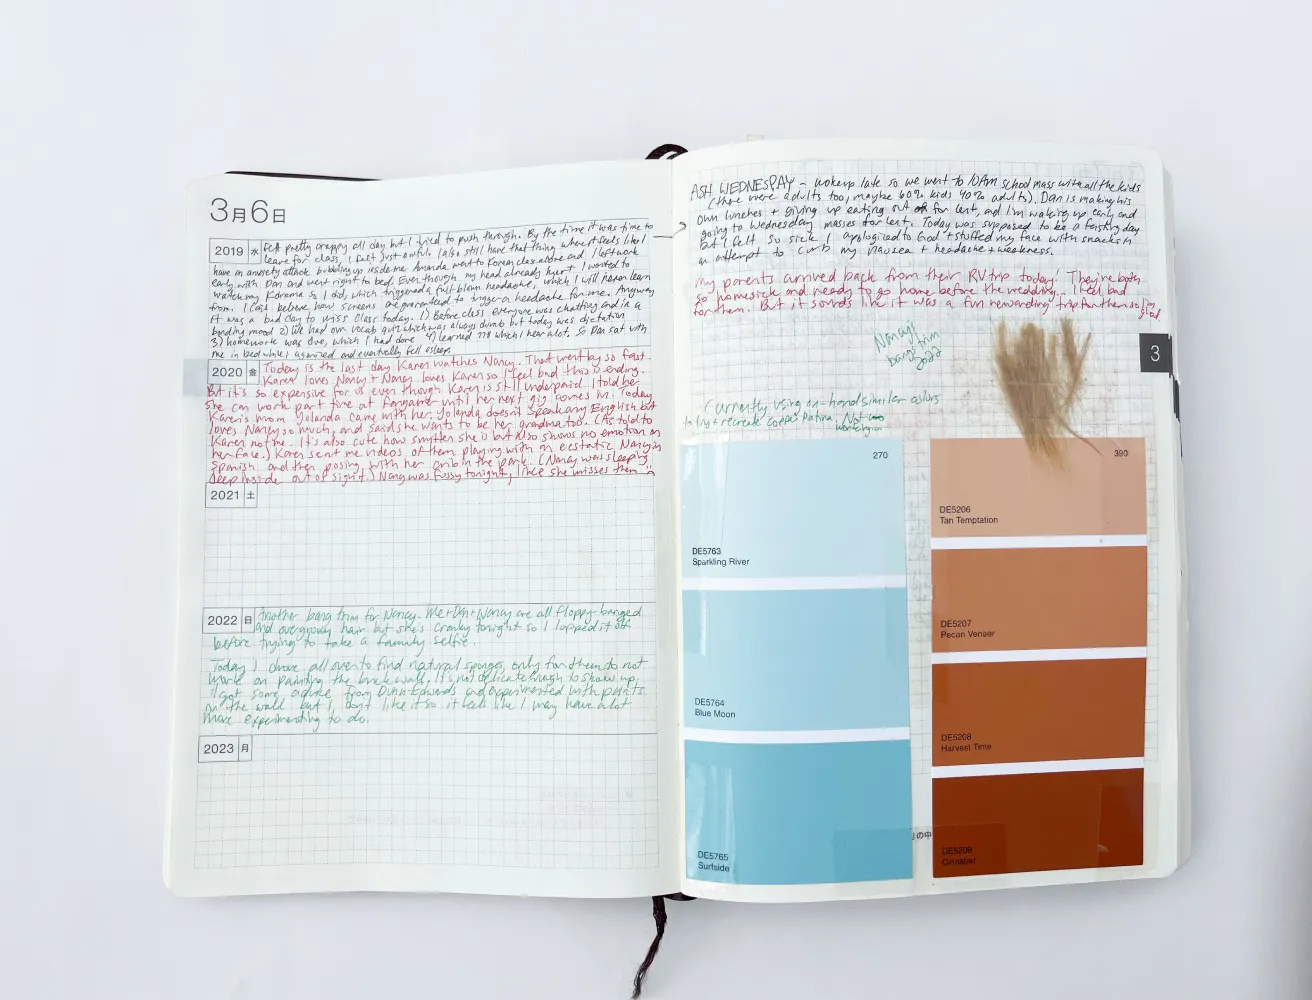 I keep a journal about me and my family. I paste in various memories, like swatches for wall paint and locks of hair when I trimmed my daughter’s hair.